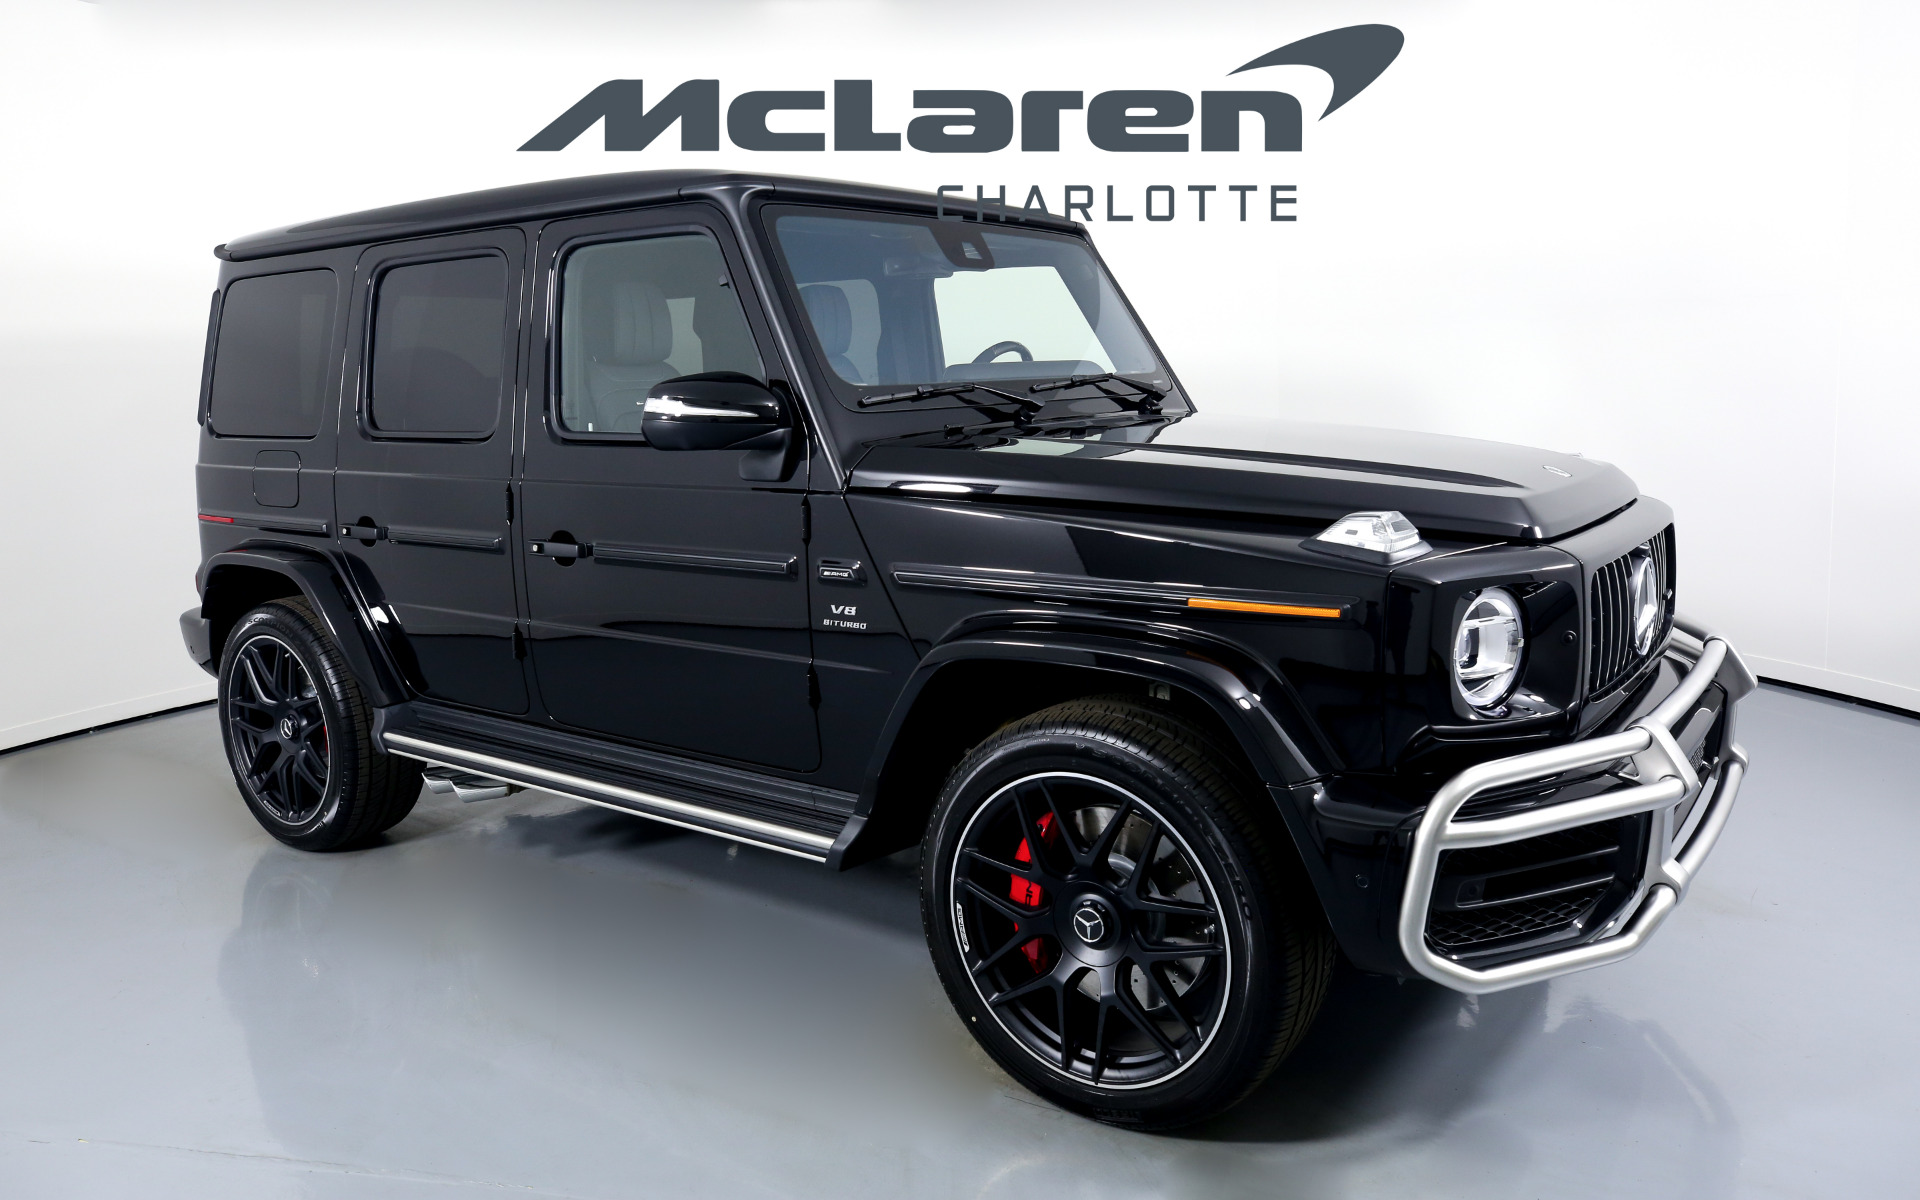 Used 21 Mercedes Benz G Class Amg G 63 For Sale 279 996 Mclaren Charlotte Stock